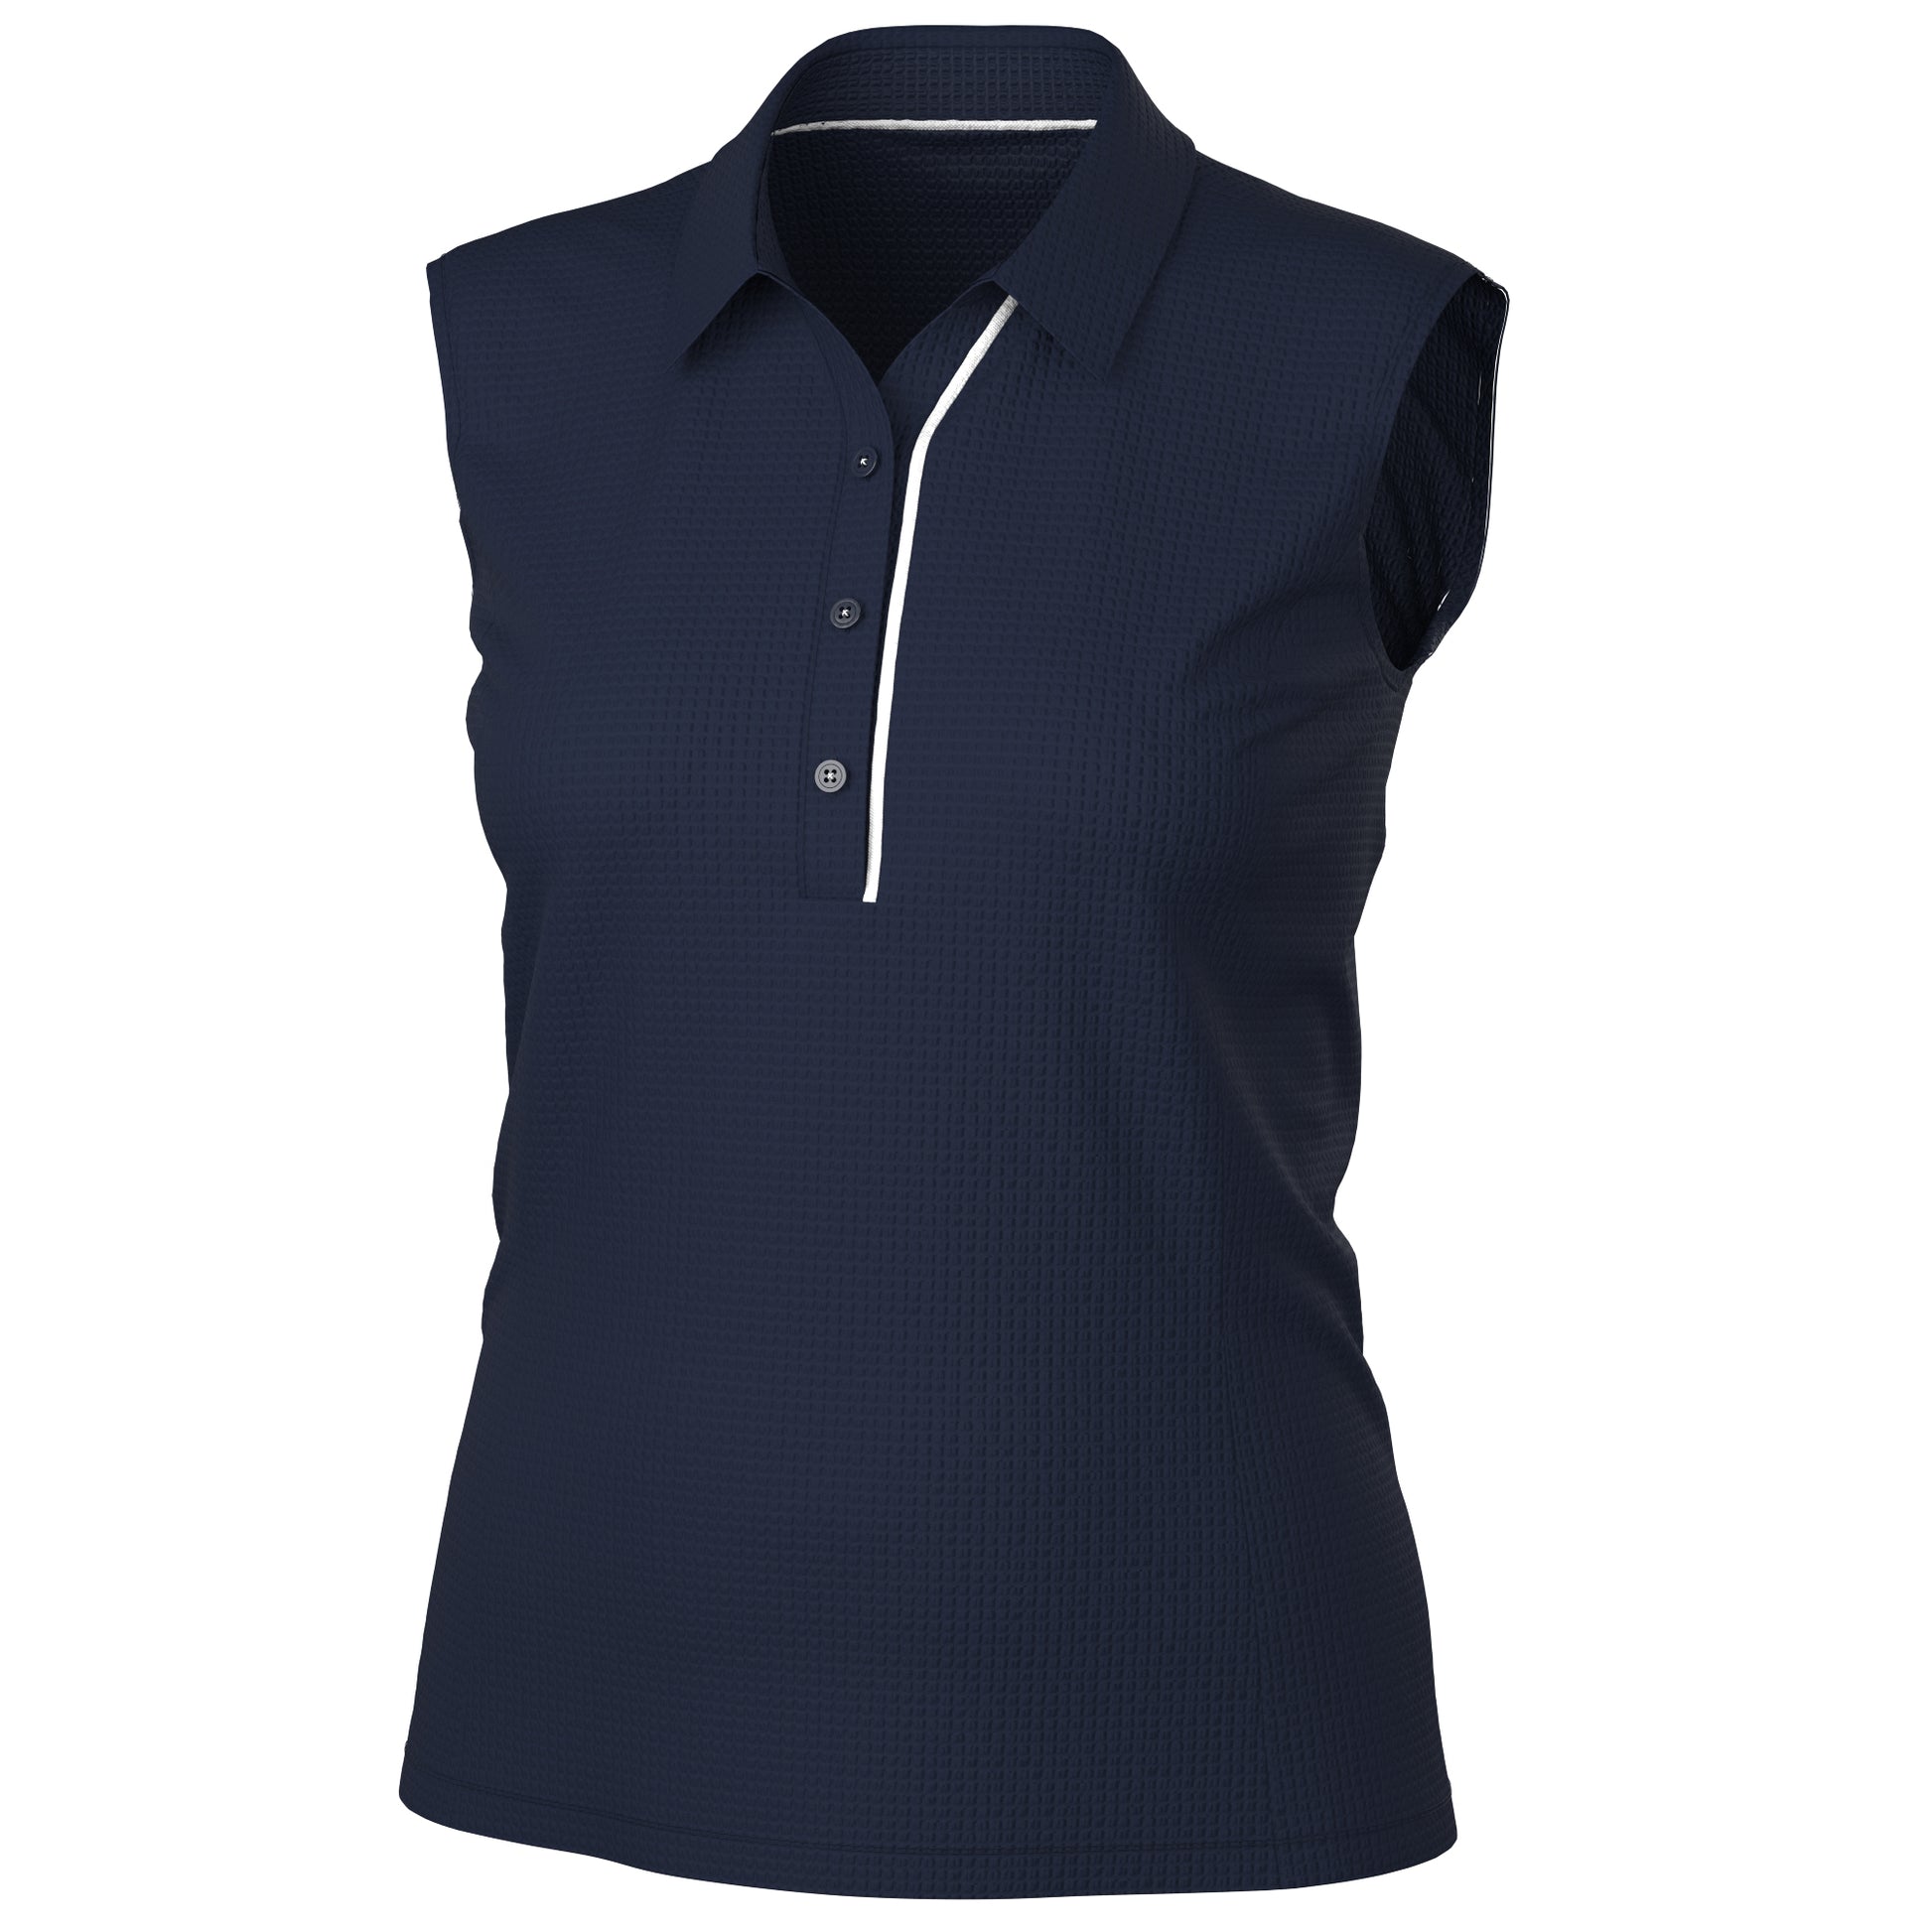 Galvin Green Ladies VENTIL8 PLUS Textured Sleeveless Polo in Navy